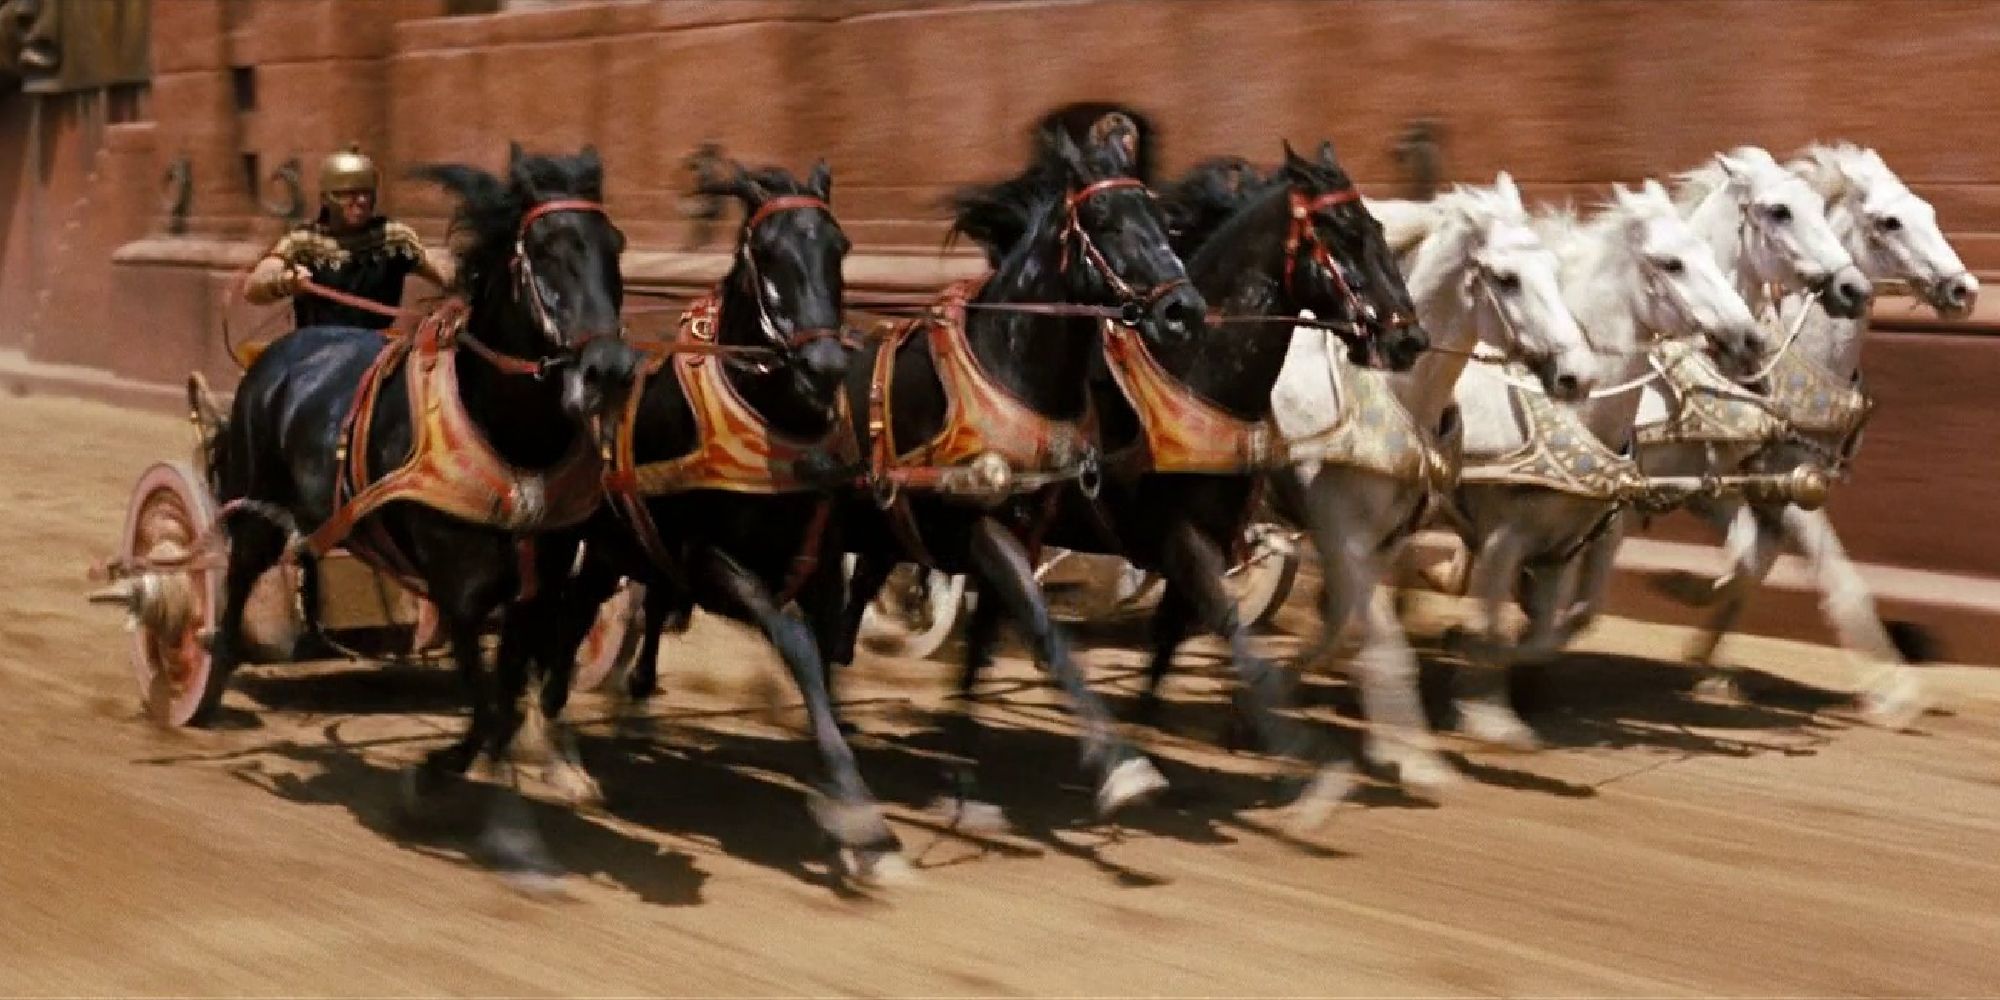 A man races a chariot pulled by eight horses in Ben-Hur